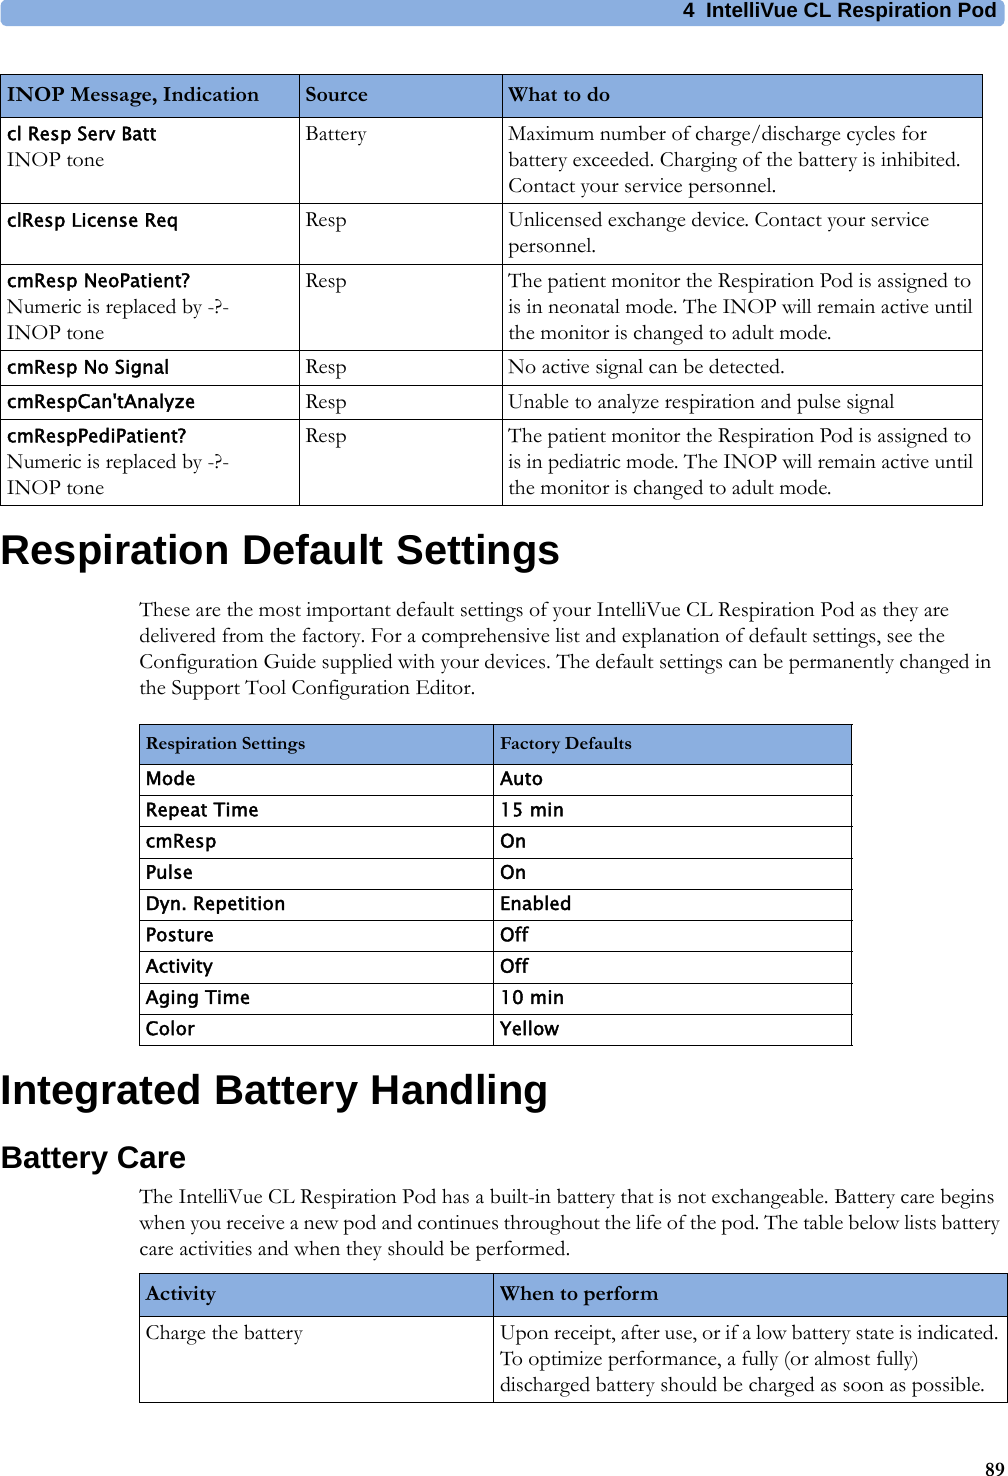 4 IntelliVue CL Respiration Pod89Respiration Default SettingsThese are the most important default settings of your IntelliVue CL Respiration Pod as they are delivered from the factory. For a comprehensive list and explanation of default settings, see the Configuration Guide supplied with your devices. The default settings can be permanently changed in the Support Tool Configuration Editor.Integrated Battery HandlingBattery CareThe IntelliVue CL Respiration Pod has a built-in battery that is not exchangeable. Battery care begins when you receive a new pod and continues throughout the life of the pod. The table below lists battery care activities and when they should be performed.cl Resp Serv BattINOP toneBattery Maximum number of charge/discharge cycles for battery exceeded. Charging of the battery is inhibited. Contact your service personnel.clResp License Req Resp Unlicensed exchange device. Contact your service personnel. cmResp NeoPatient?Numeric is replaced by -?-INOP toneResp The patient monitor the Respiration Pod is assigned to is in neonatal mode. The INOP will remain active until the monitor is changed to adult mode.cmResp No Signal Resp No active signal can be detected.cmRespCan&apos;tAnalyze Resp Unable to analyze respiration and pulse signalcmRespPediPatient?Numeric is replaced by -?-INOP toneResp The patient monitor the Respiration Pod is assigned to is in pediatric mode. The INOP will remain active until the monitor is changed to adult mode.INOP Message, Indication Source What to doRespiration Settings Factory DefaultsMode AutoRepeat Time 15 mincmResp OnPulse OnDyn. Repetition EnabledPosture OffActivity OffAging Time 10 minColor YellowActivity When to performCharge the battery Upon receipt, after use, or if a low battery state is indicated. To optimize performance, a fully (or almost fully) discharged battery should be charged as soon as possible.